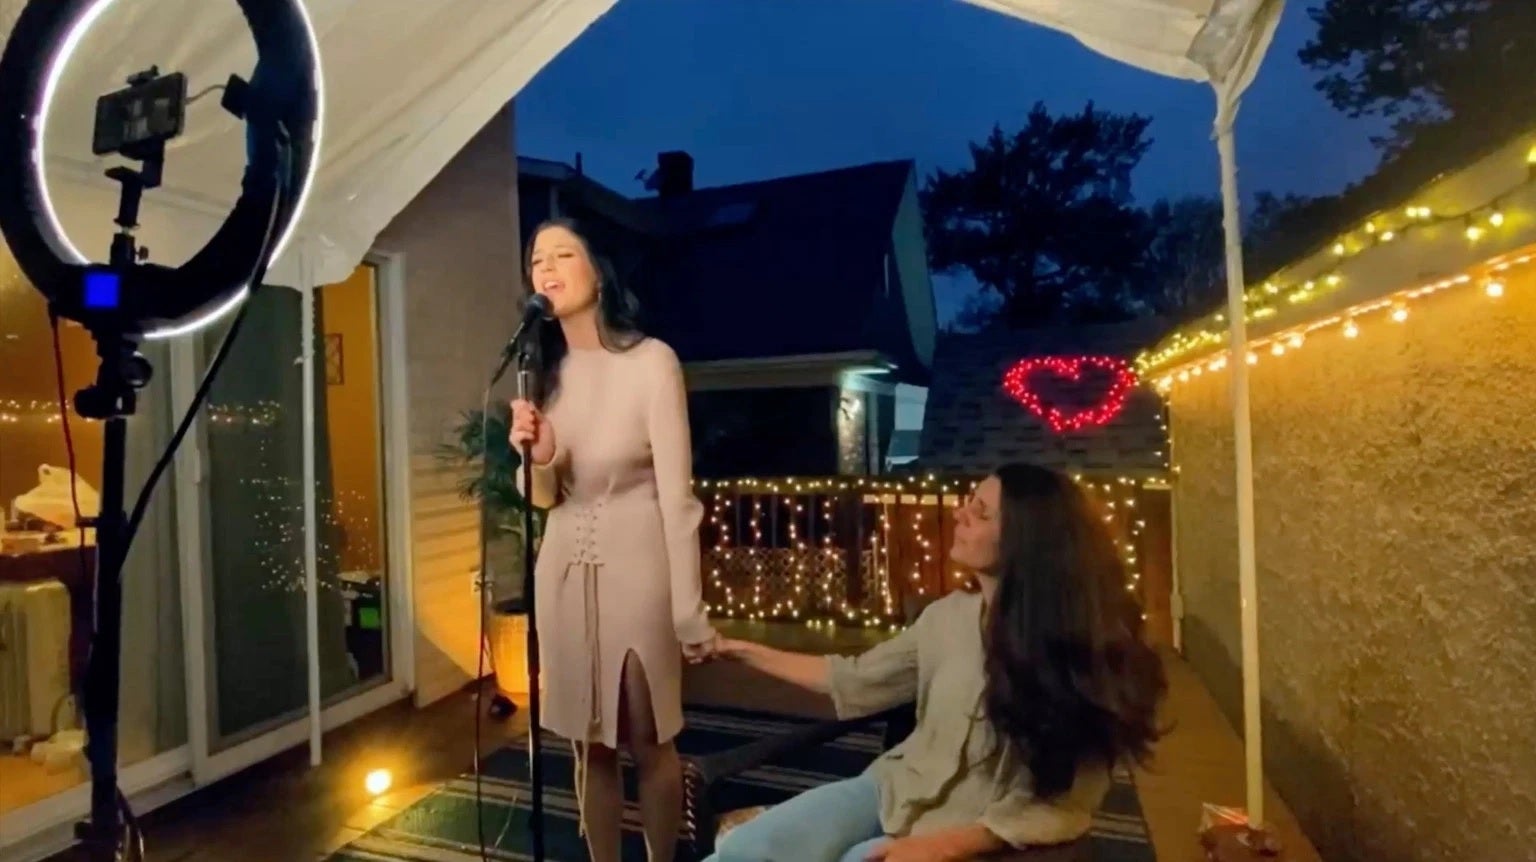 American Idol contestant broadcasts live from her house using an iPhone 11 Pro - The Apple iPhone is the beneficiary of a huge change in the television industry